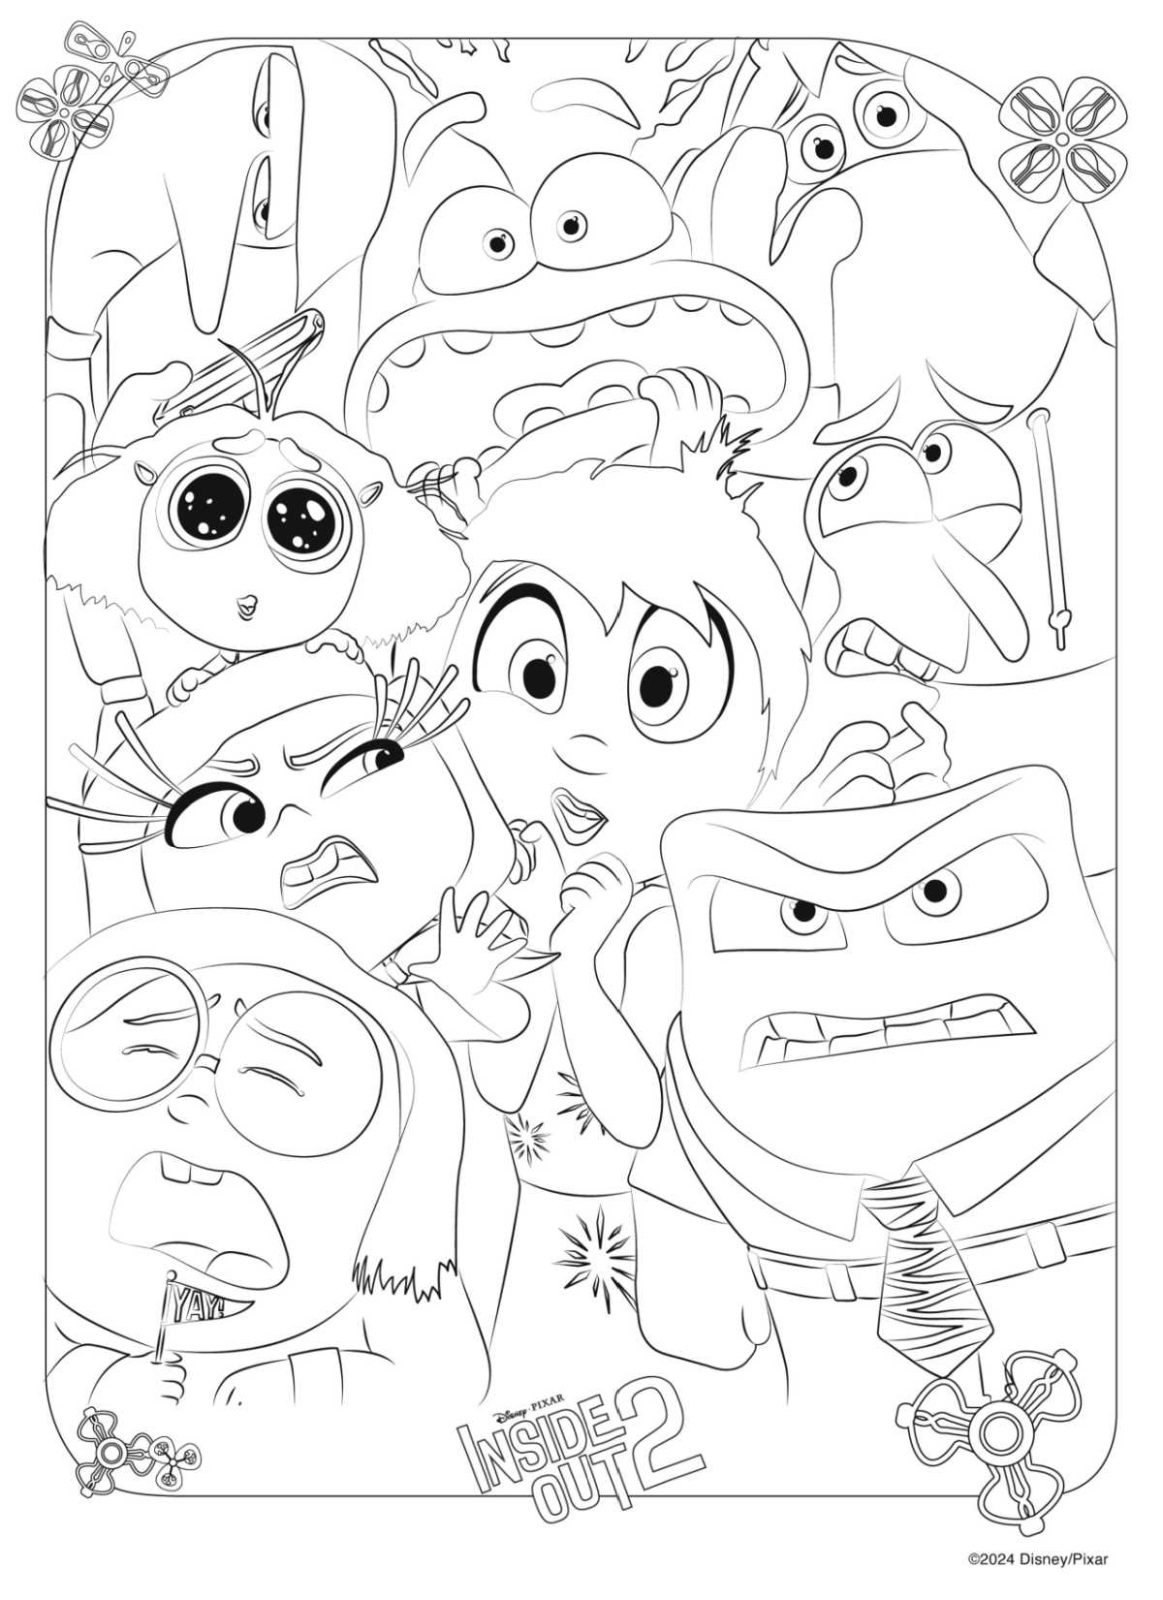 inside out 2 characters coloring page